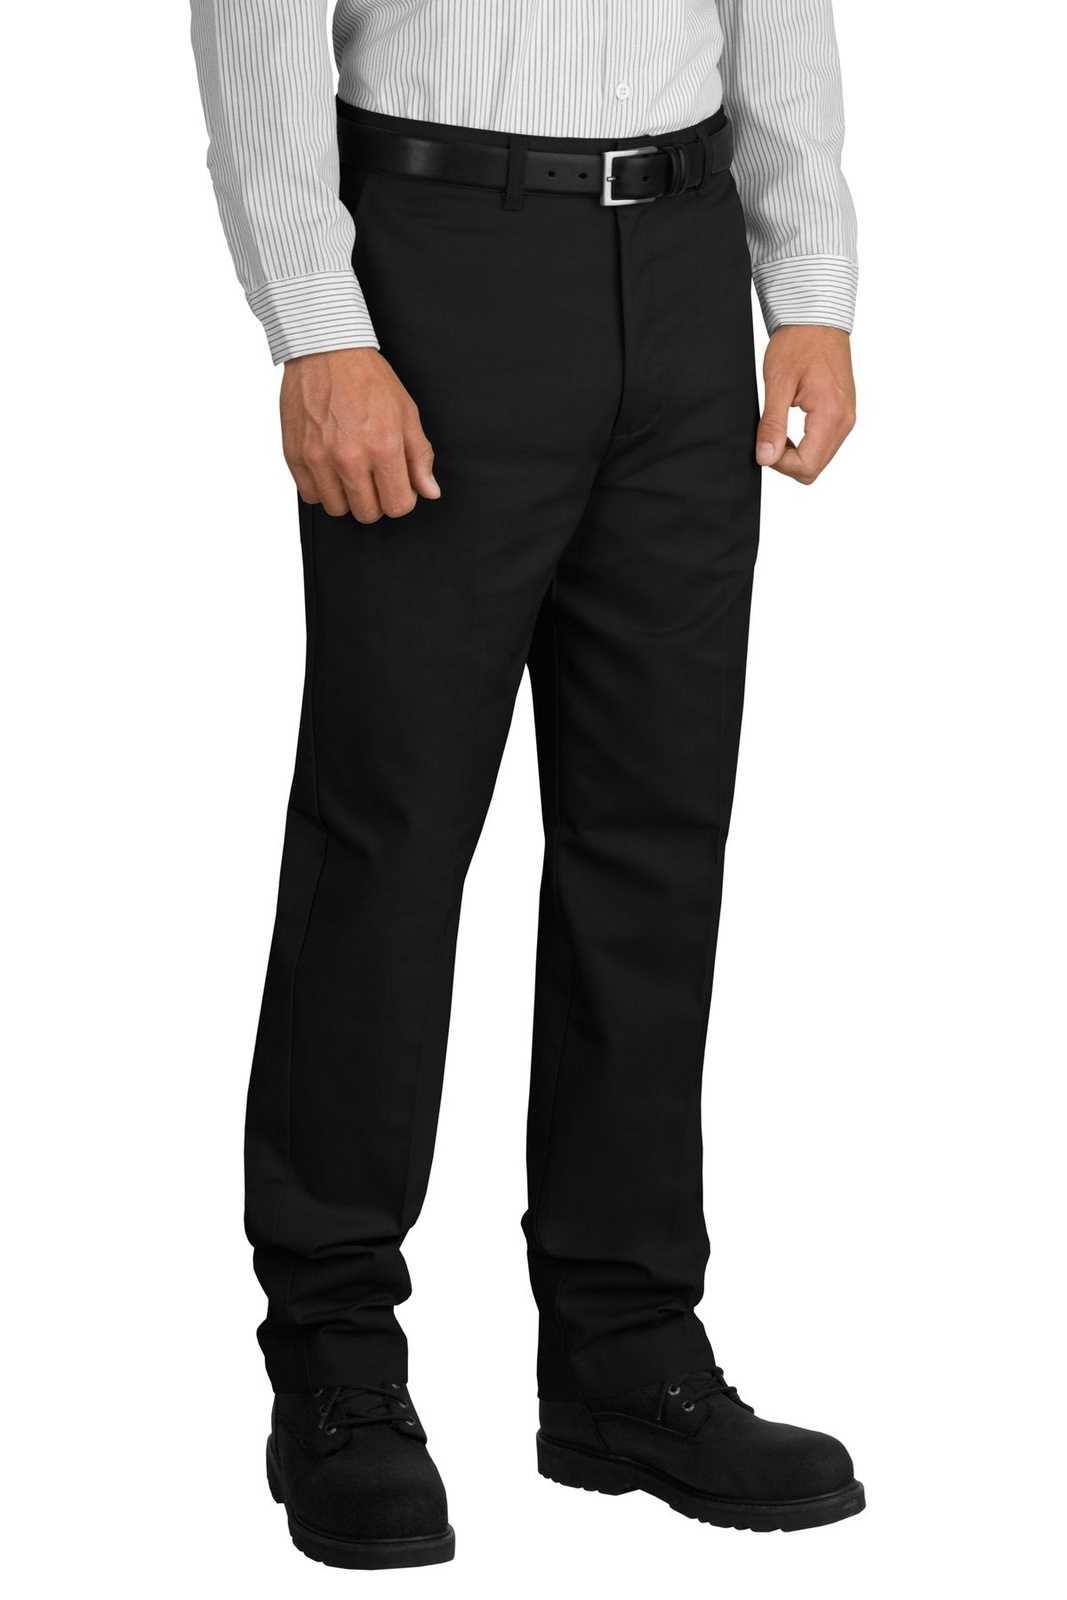 Red Kap PT20 Industrial Work Pant - Black - HIT a Double - 1